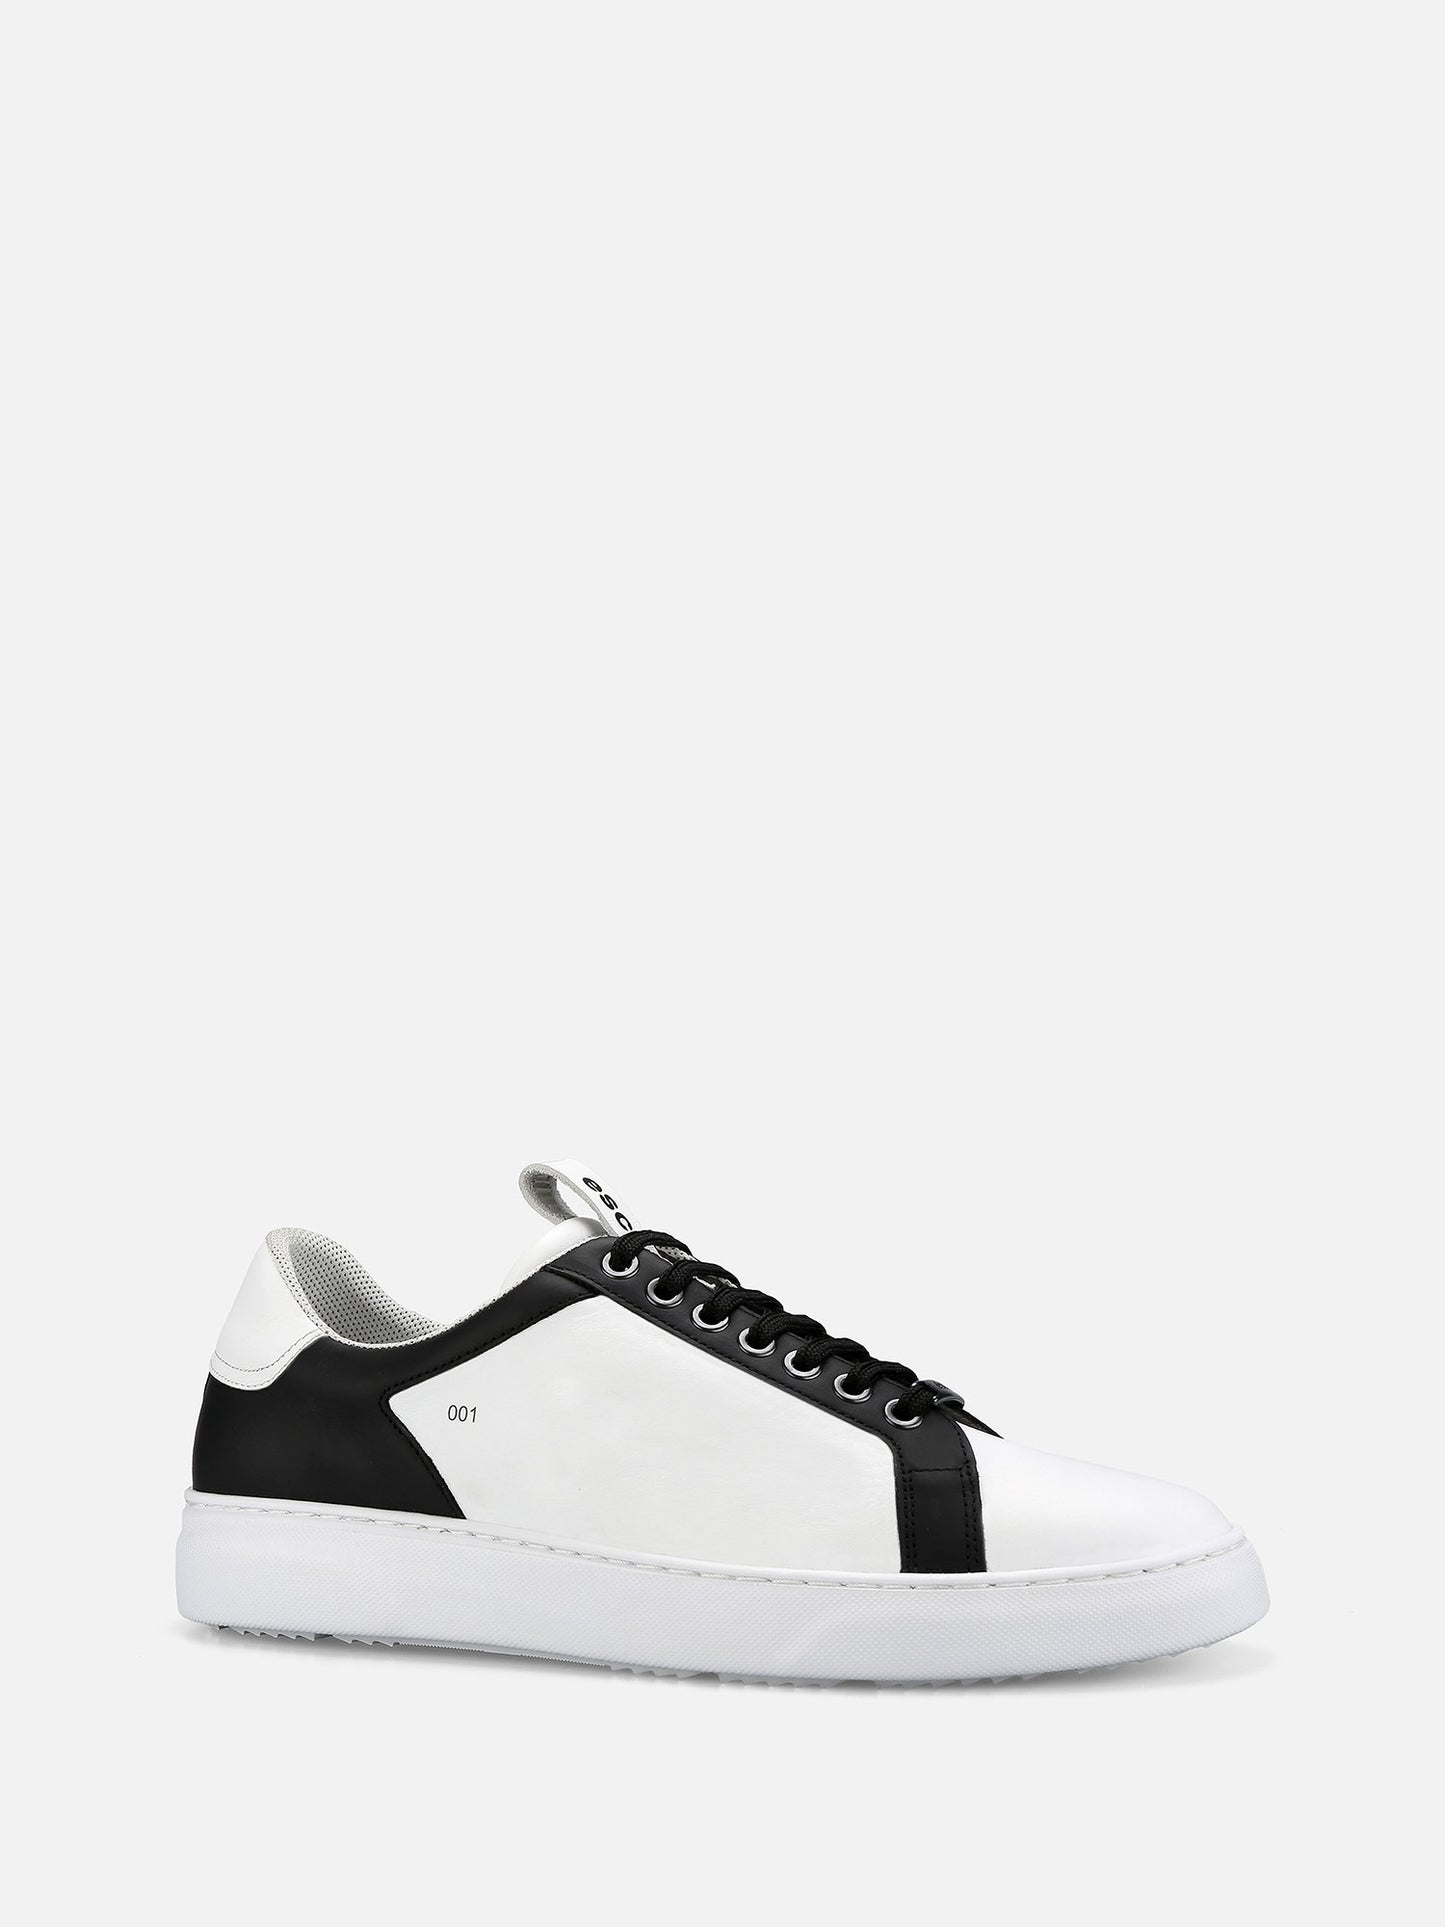 GHOST Low Leather Sneakers - White/Black